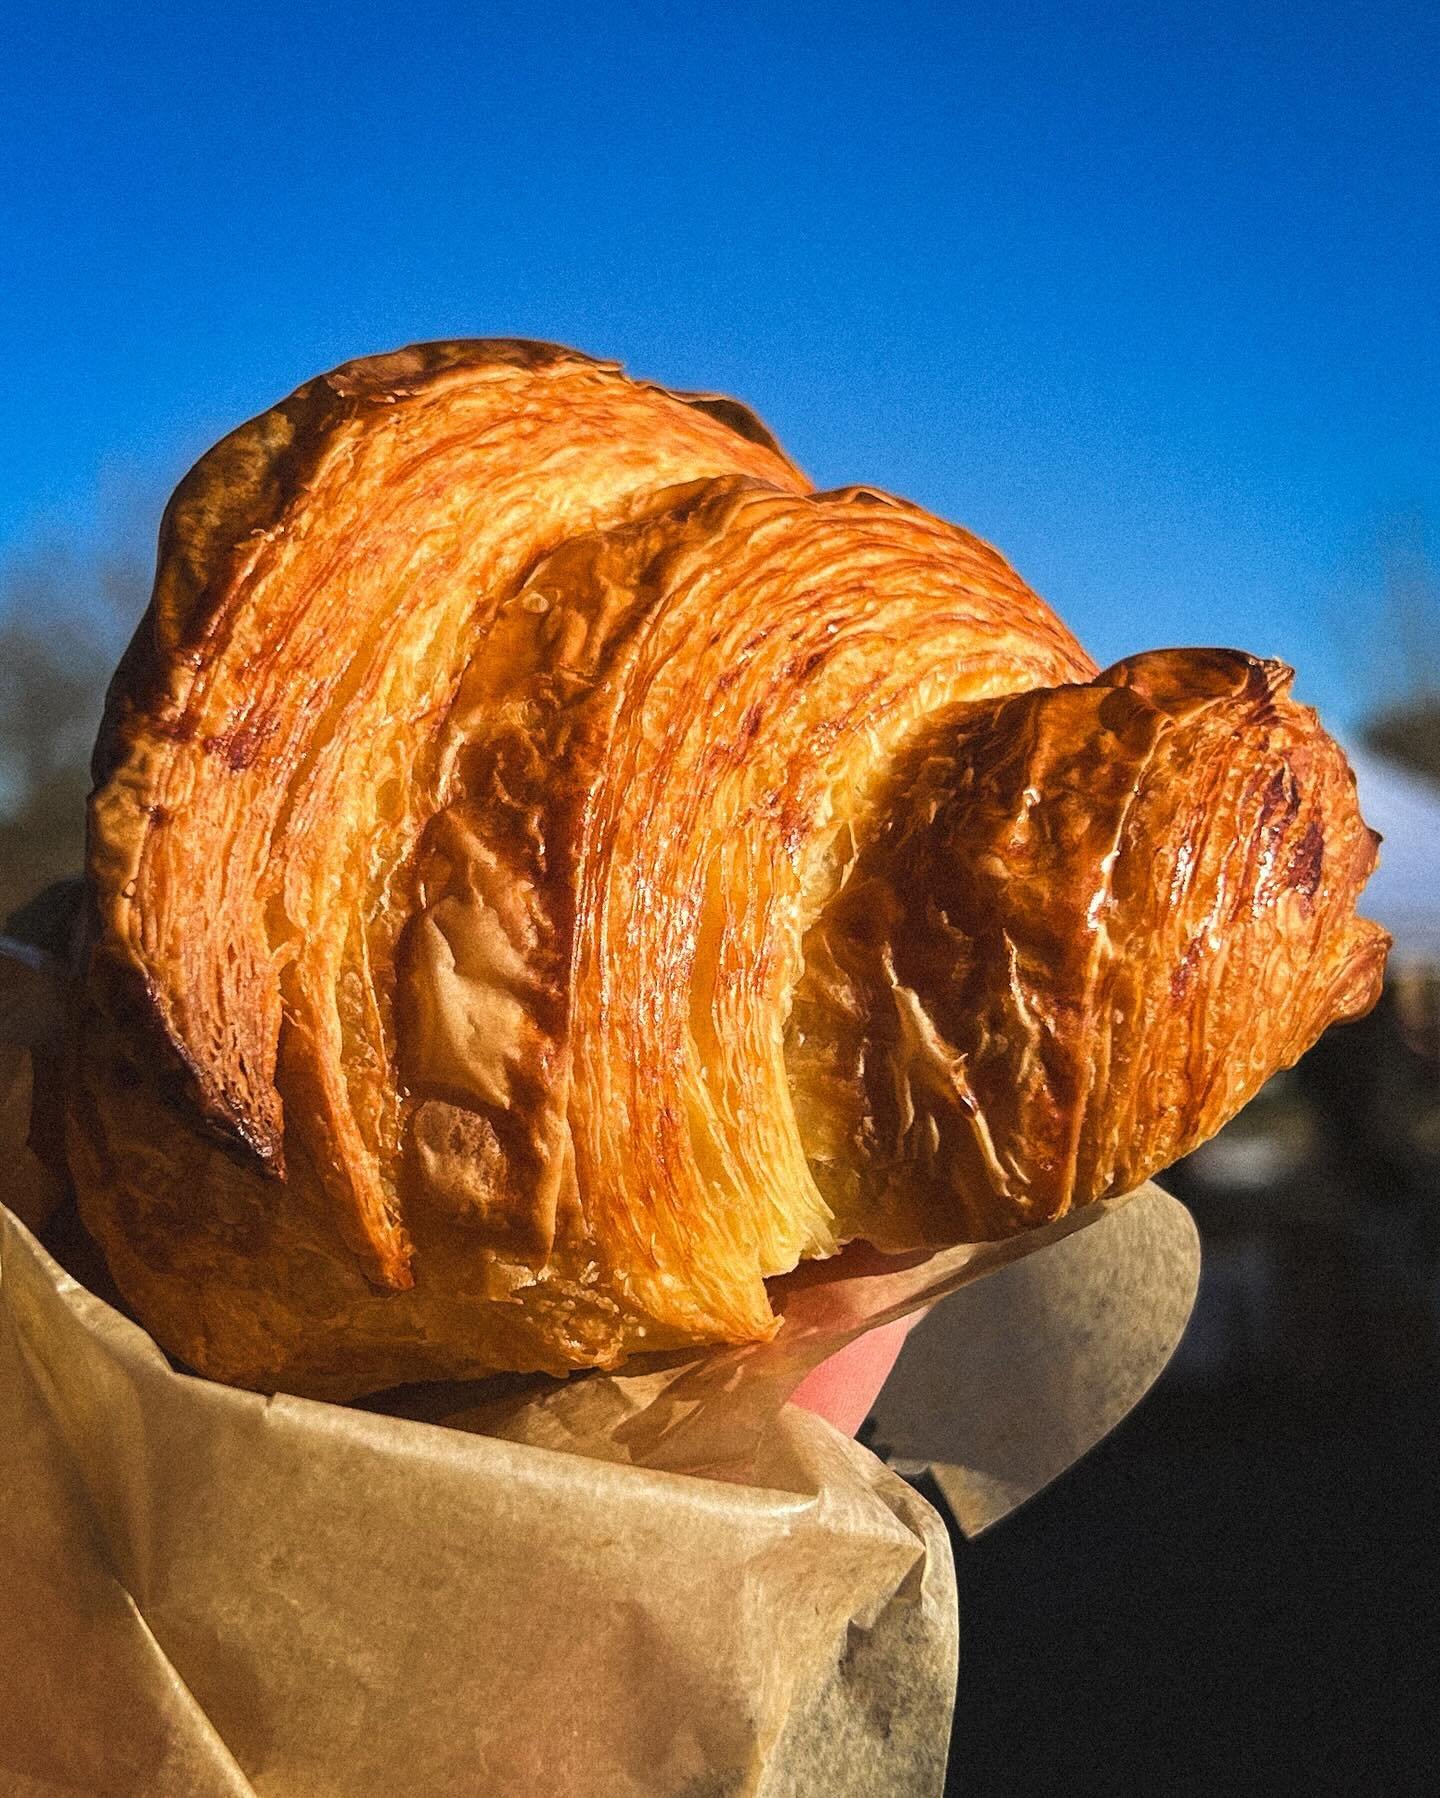 We are Honored to Have Made it to The Finals for the Best Croissant in San Francisco! The Competition itself is Happening on May 19th in San Francisco at The Clift Royal Sonesta. To Anyone interested ~ There are Tickets Available and You&rsquo;d be i